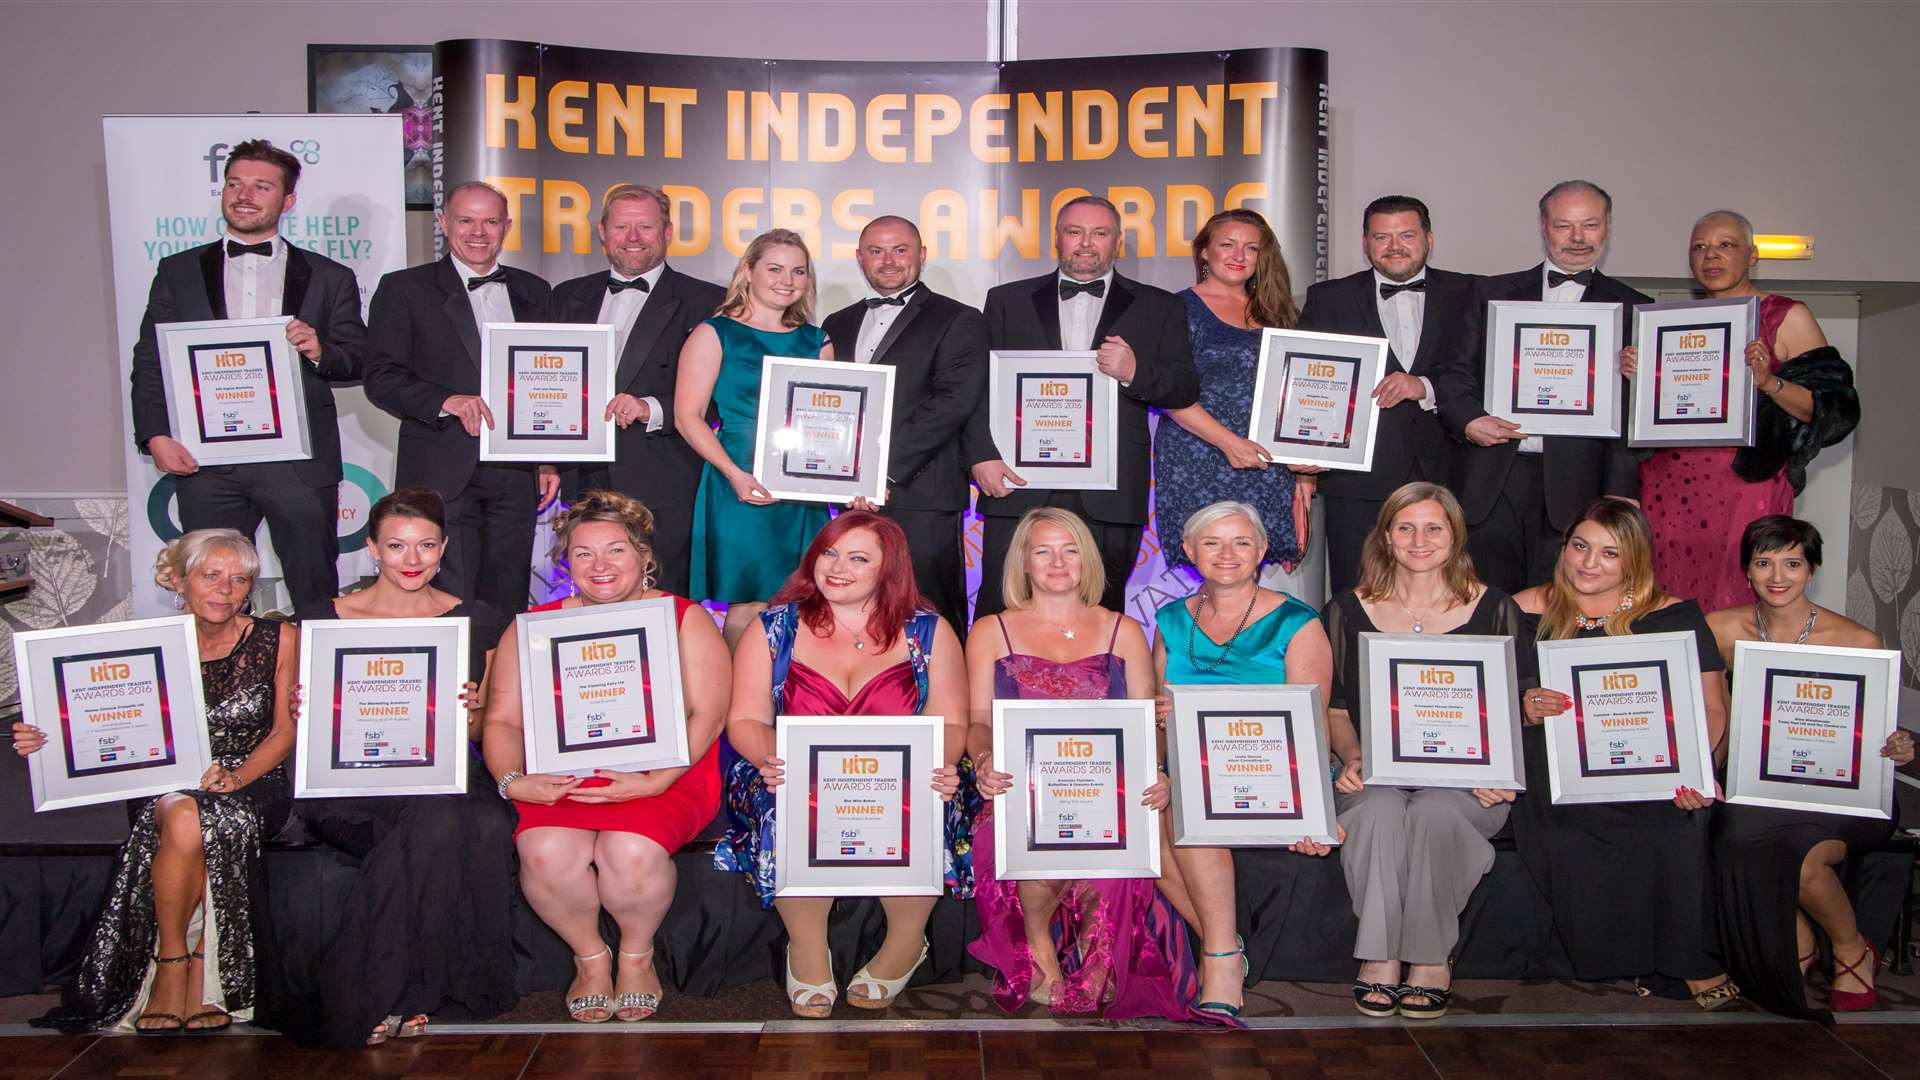 Winners at the Kent Independent Traders Awards 2016. Picture: Schumann Photography